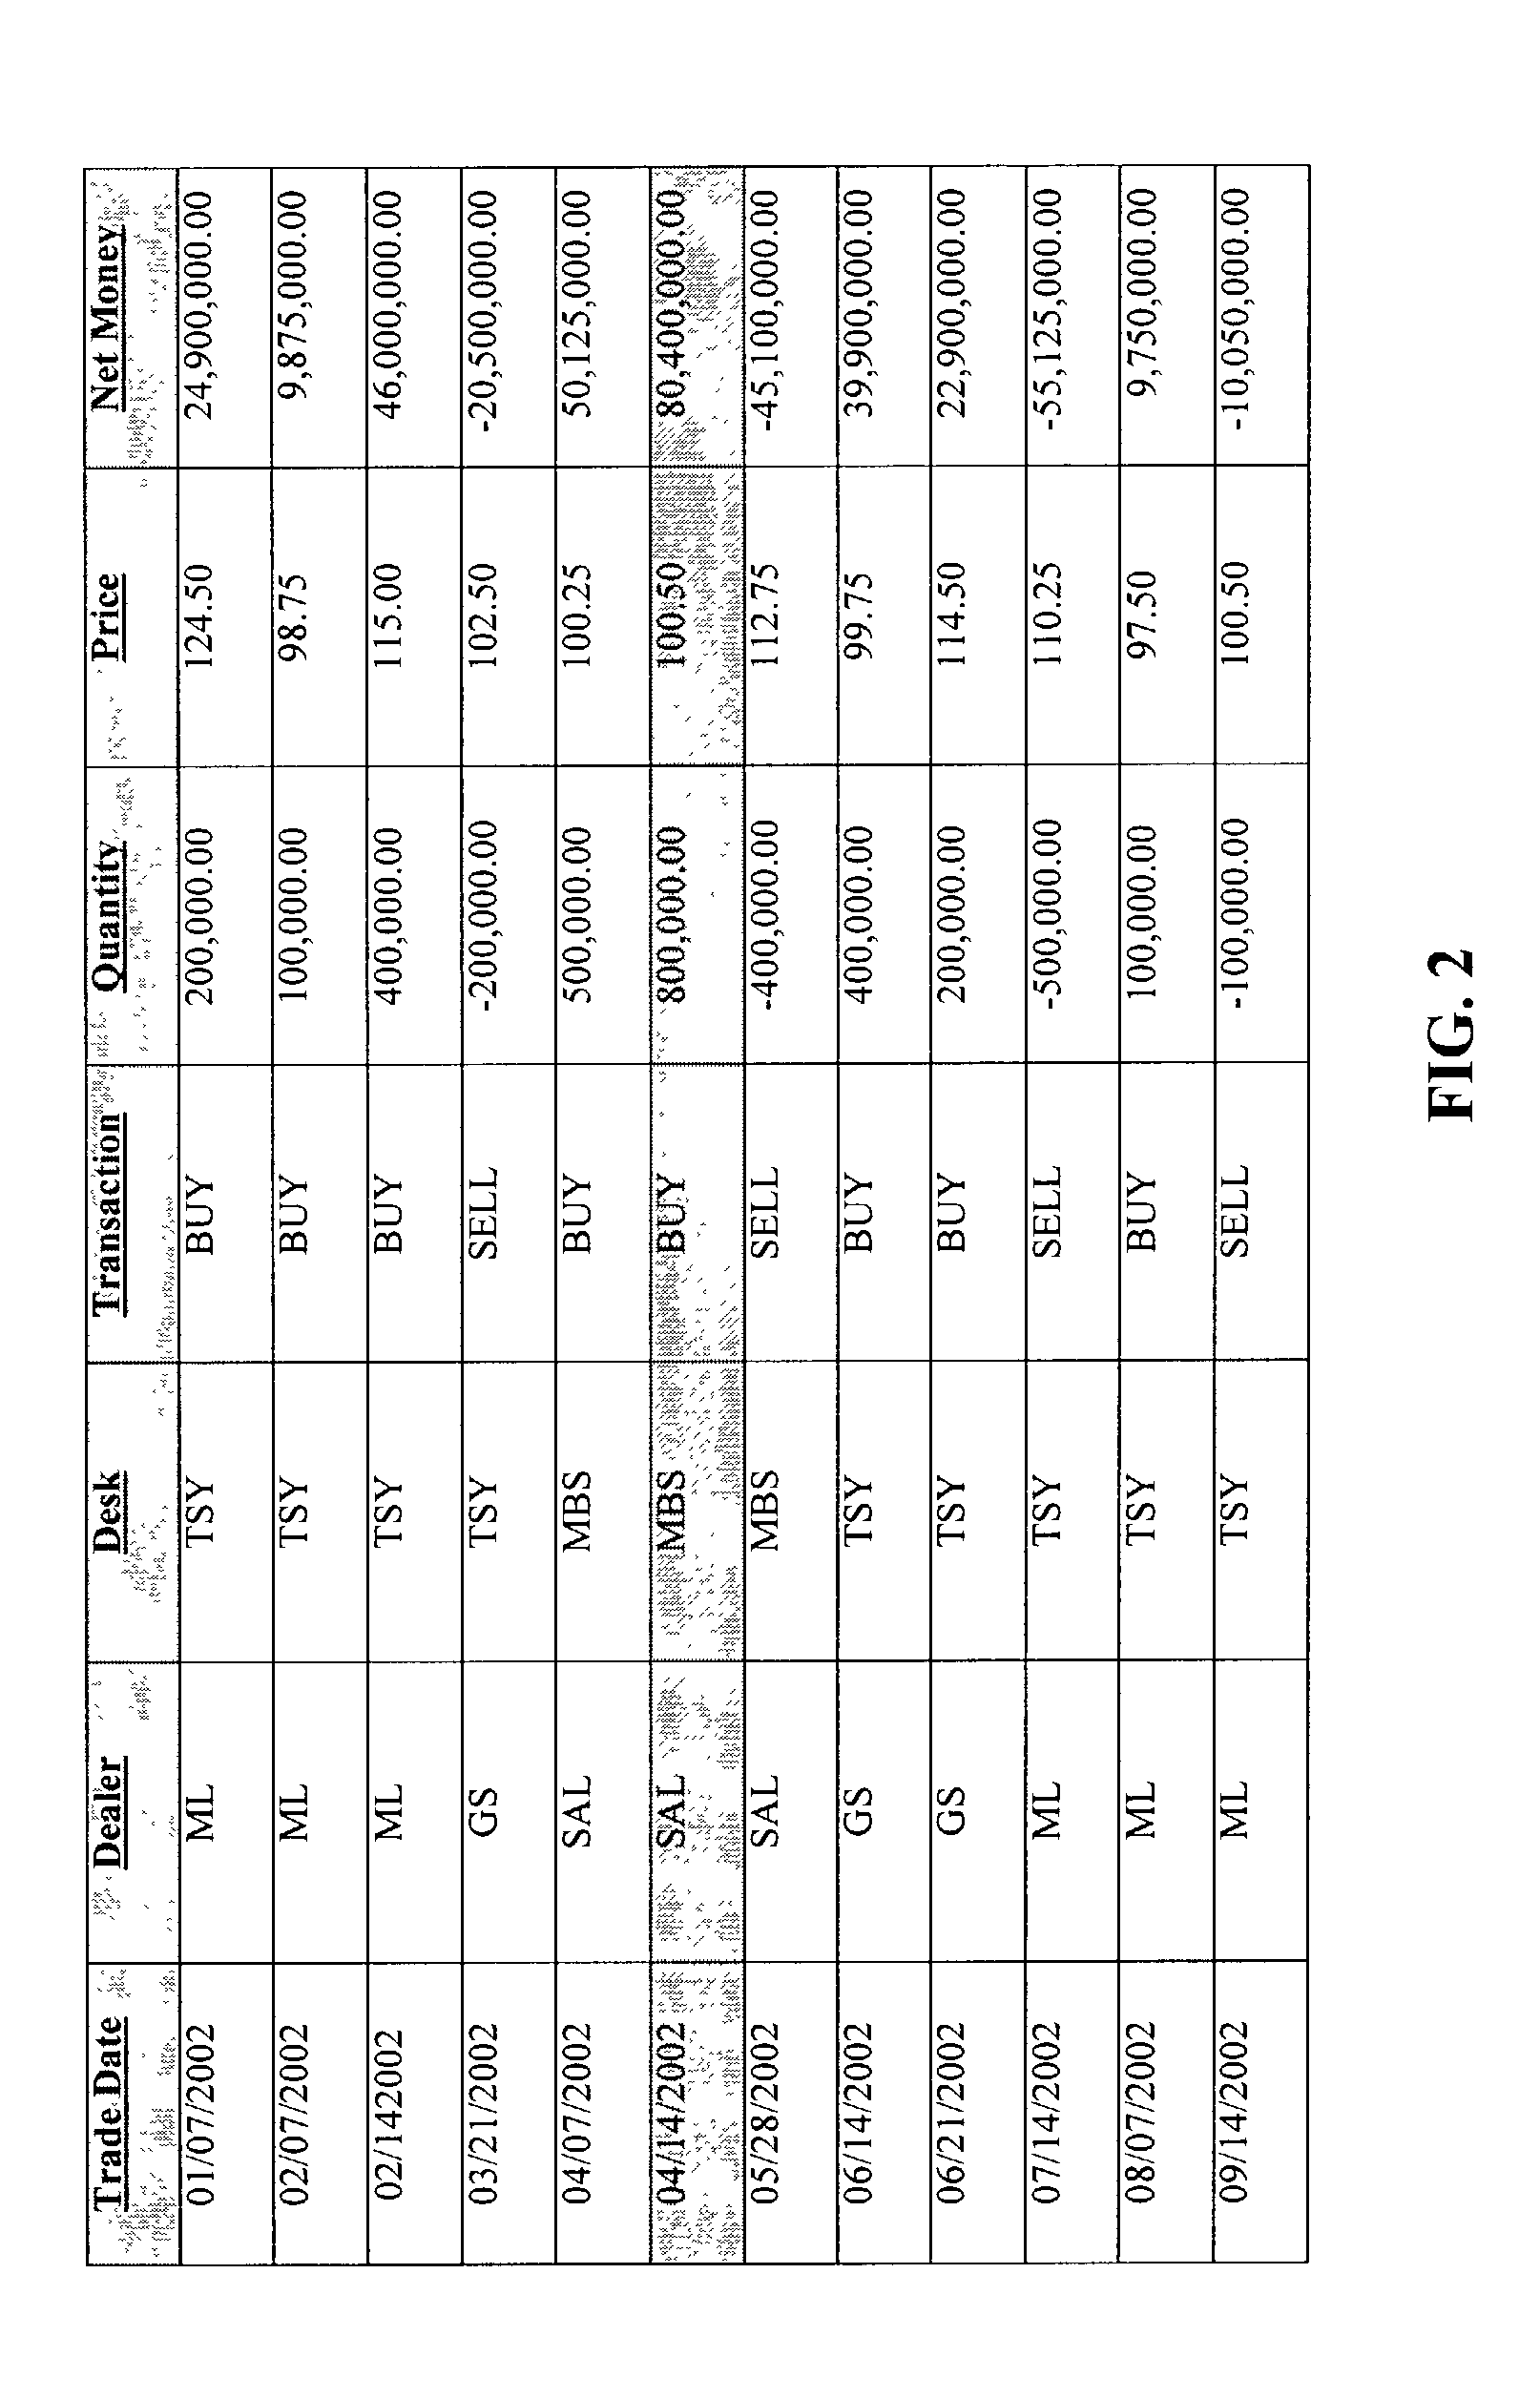 System and method for implementing dynamic set operations on data stored in a sorted array